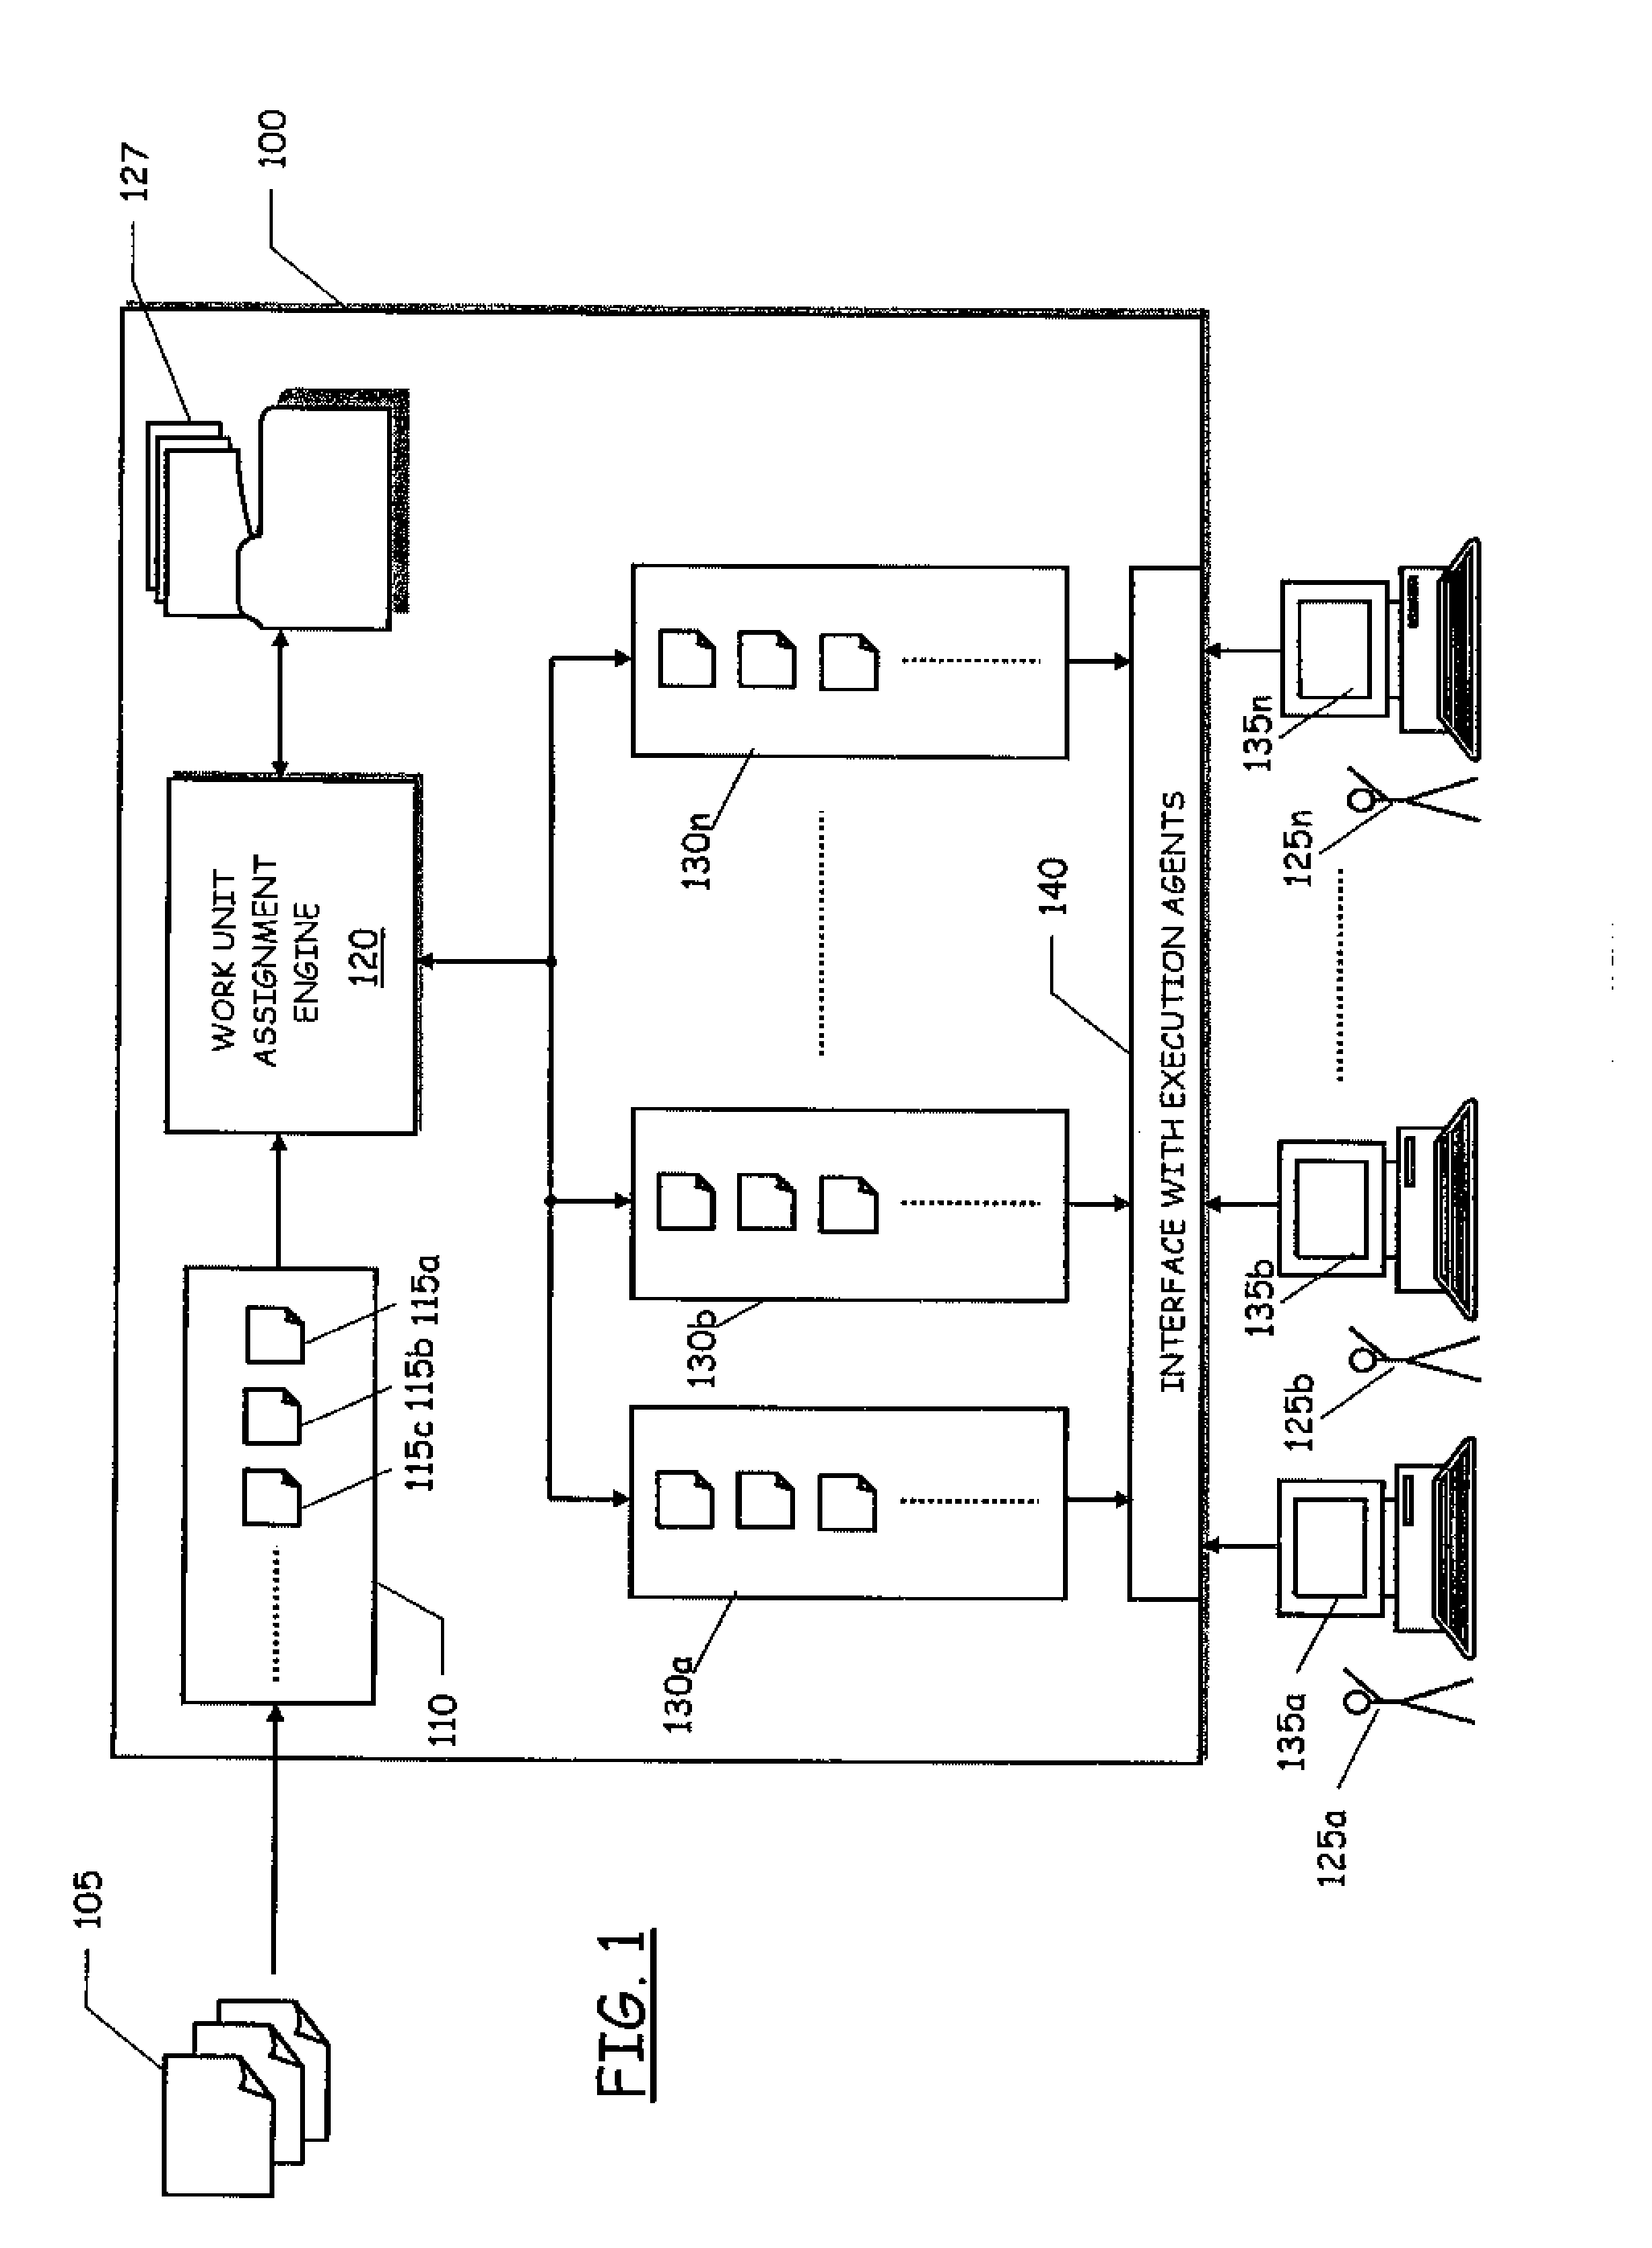 Method and system for automatic assignment of work units to agents